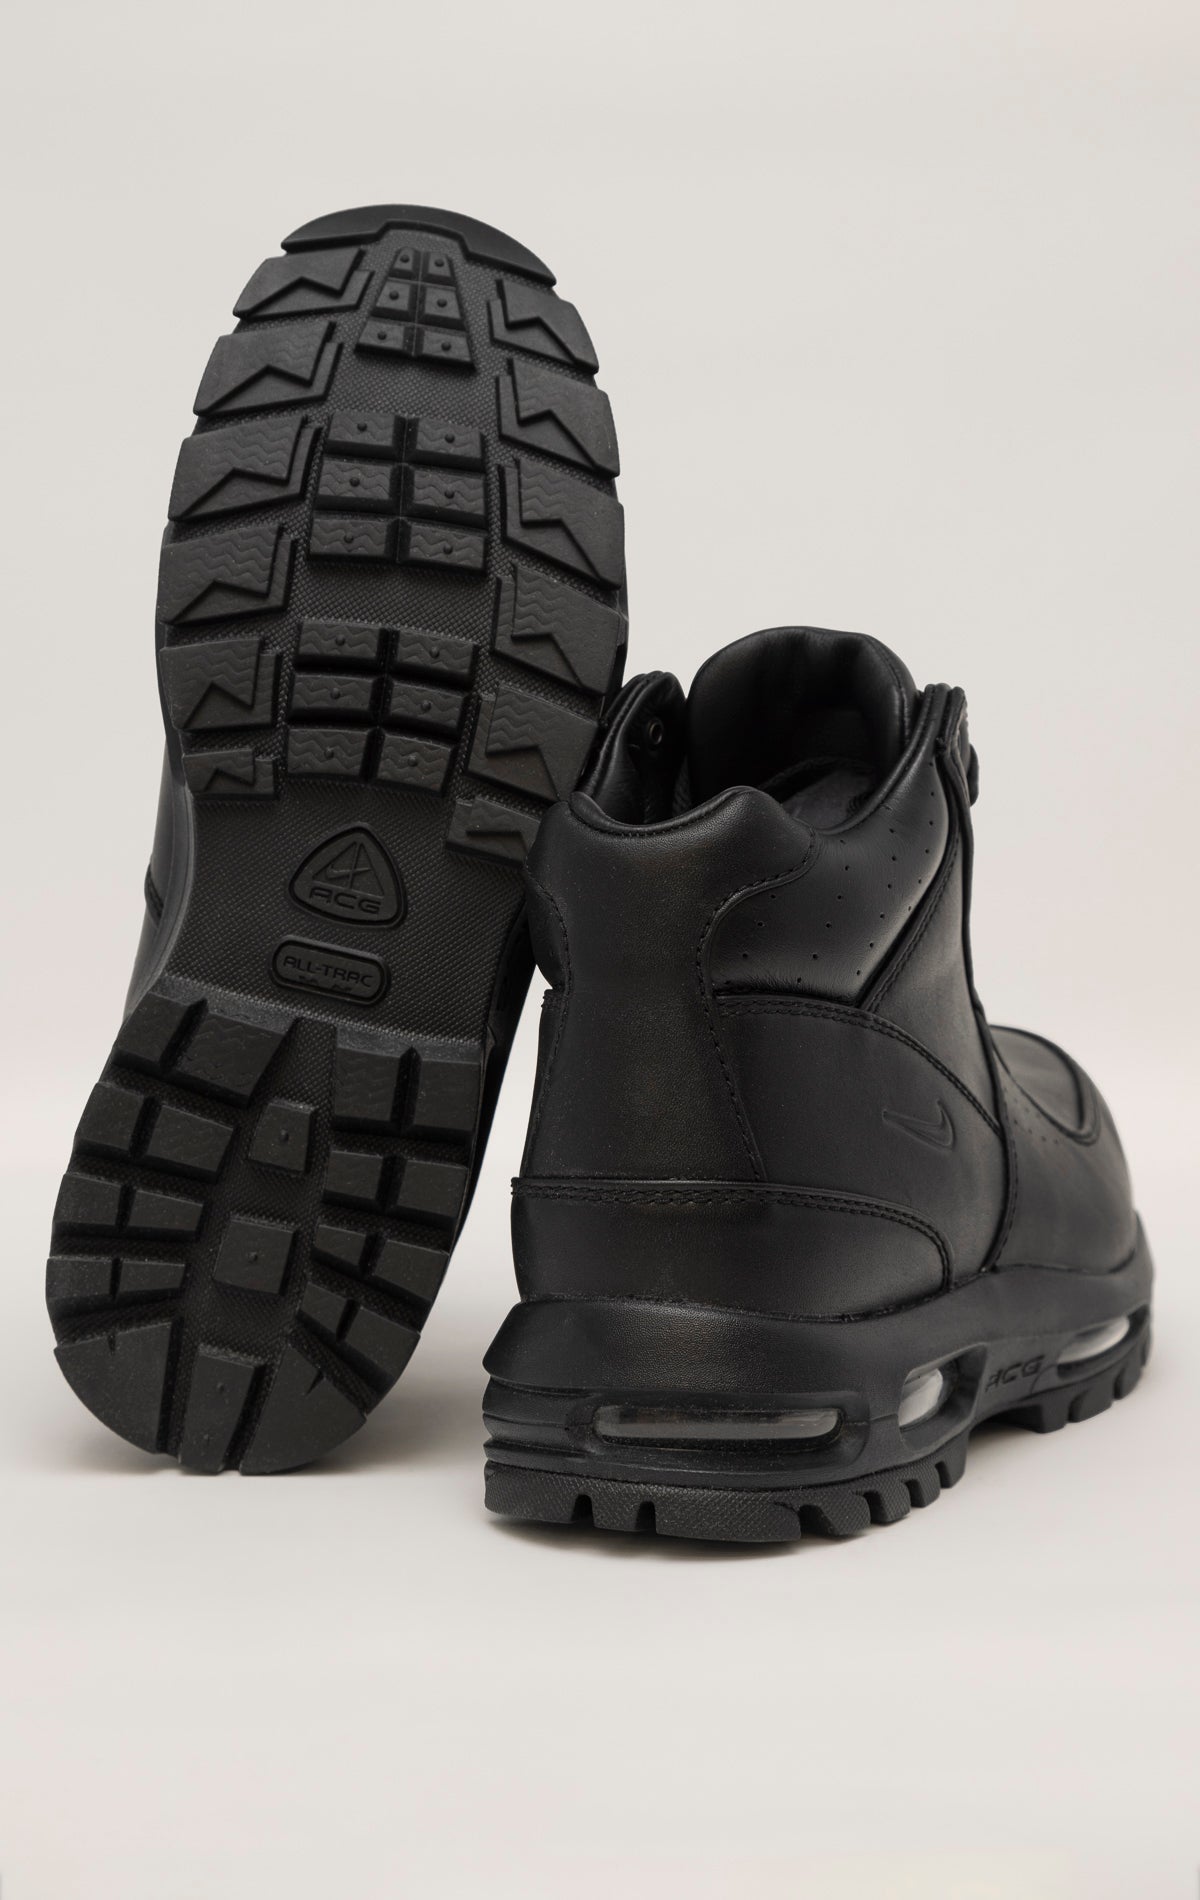 Black Nike Air Max Goadome sneakers with visible Air unit in the heel and lugged outsole for traction.